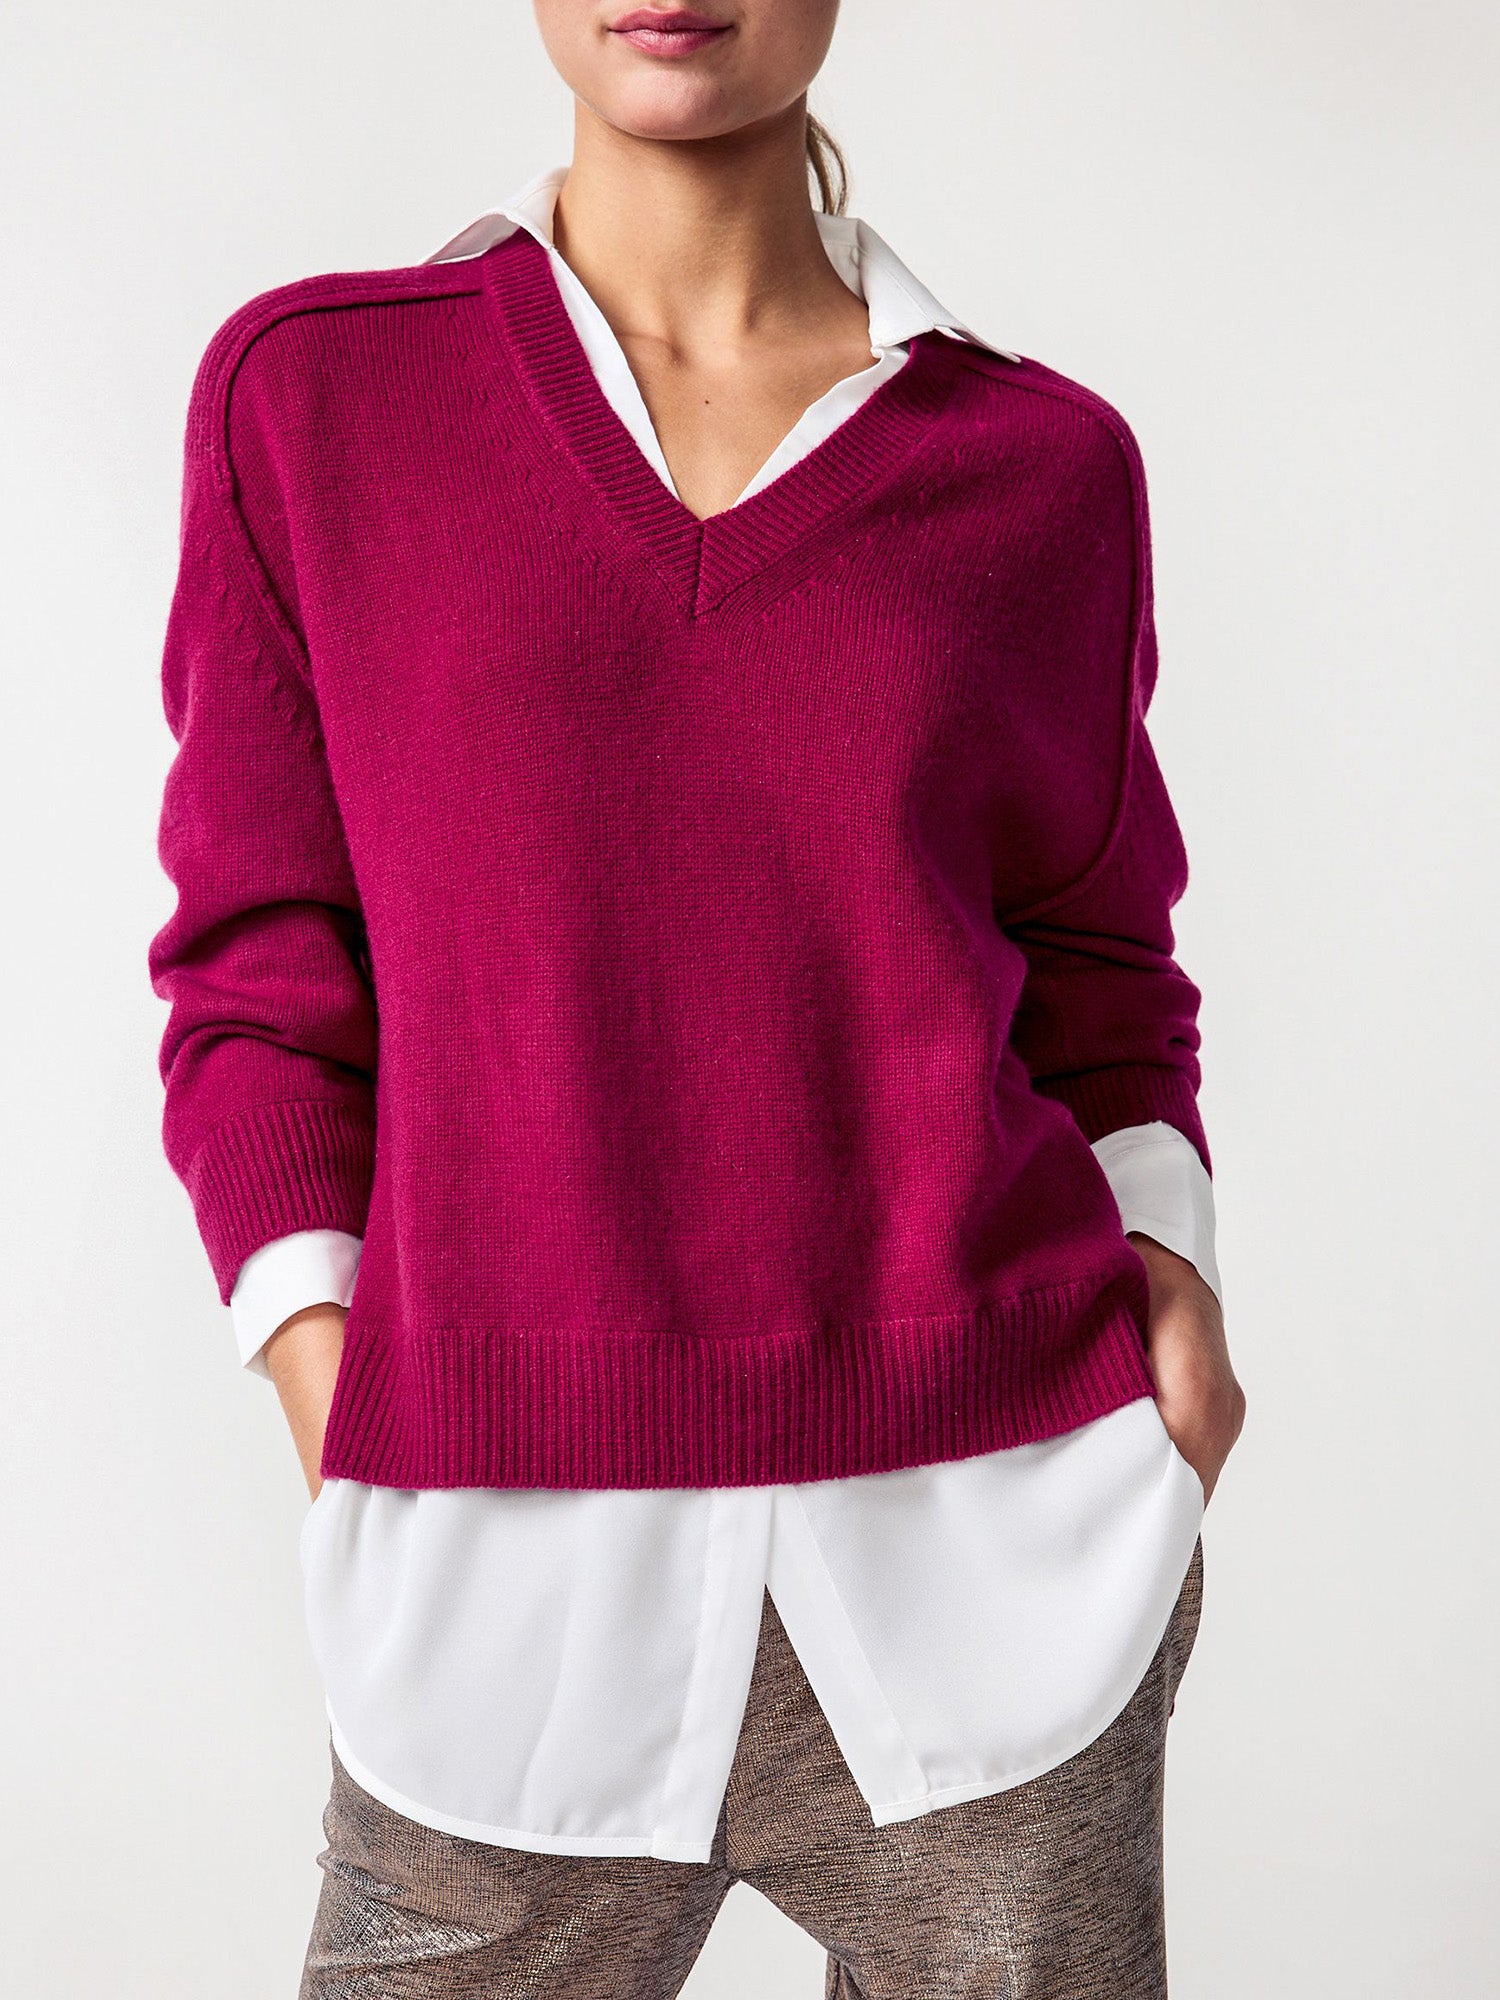 Looker dark red layered v-neck sweater front view